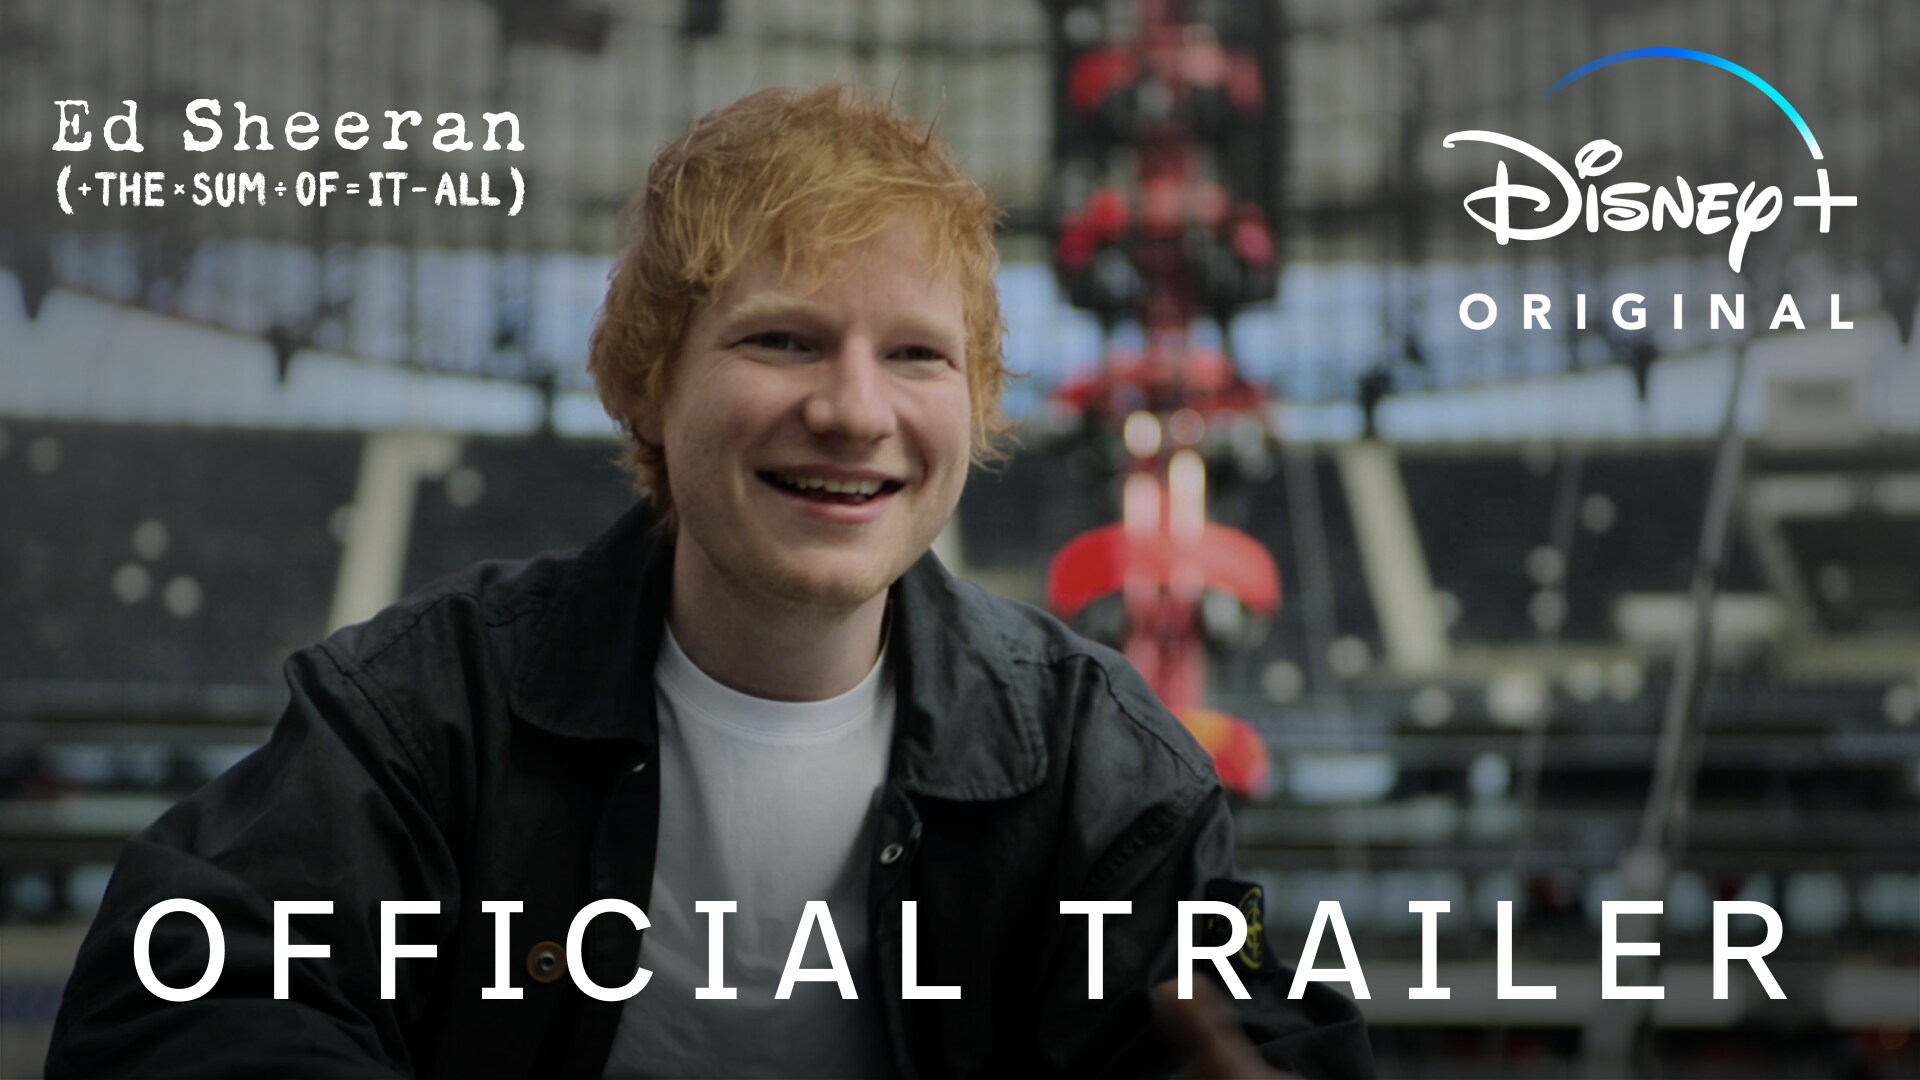 Ed Sheeran: The Sum of It All | Official Trailer | Disney+